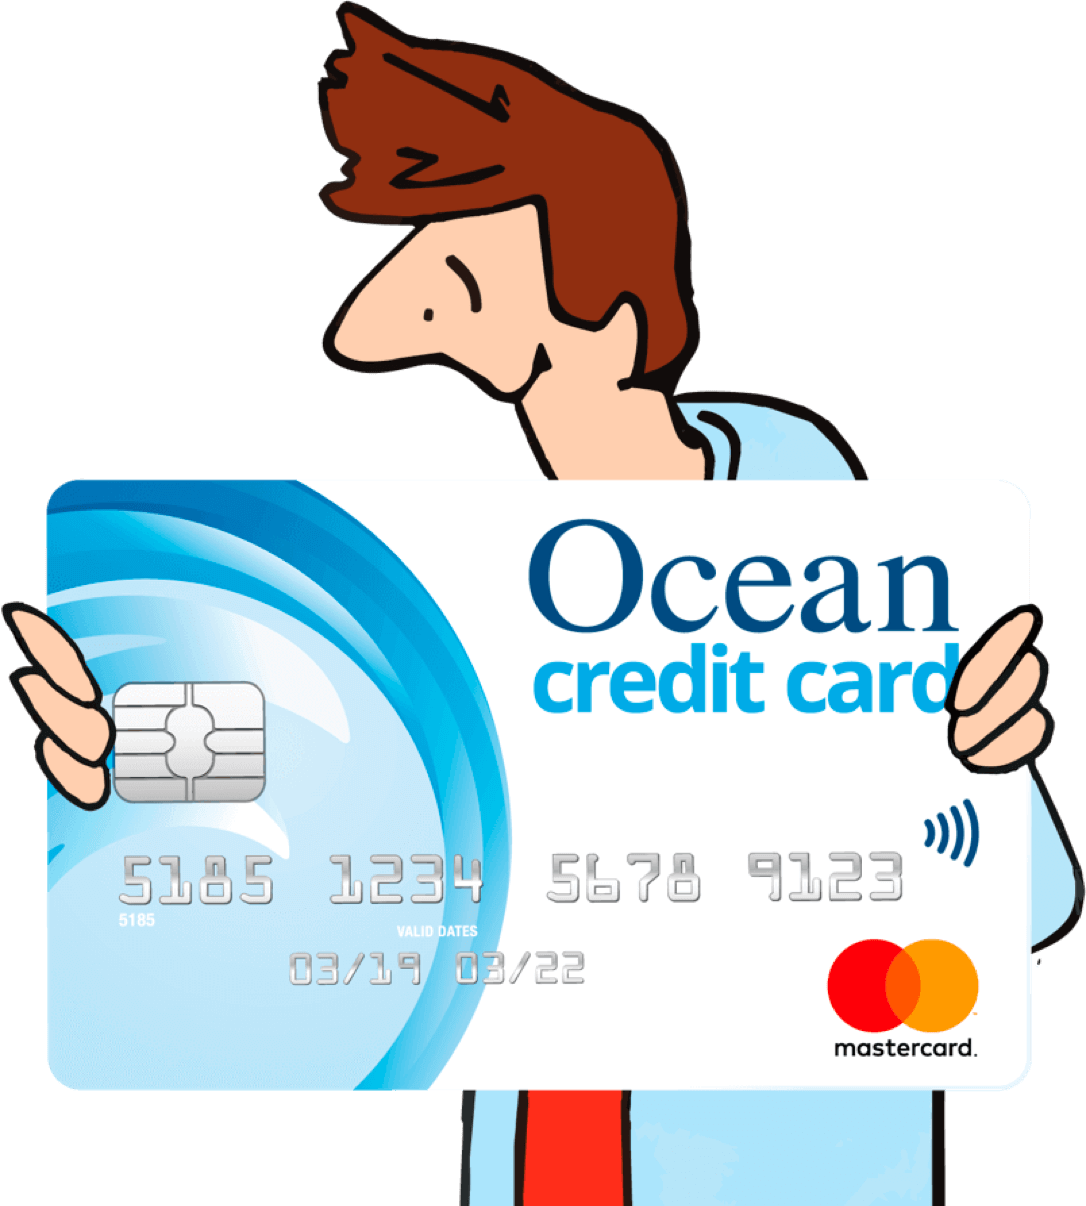 Ocean Finance Credit Card - Learn How to Apply